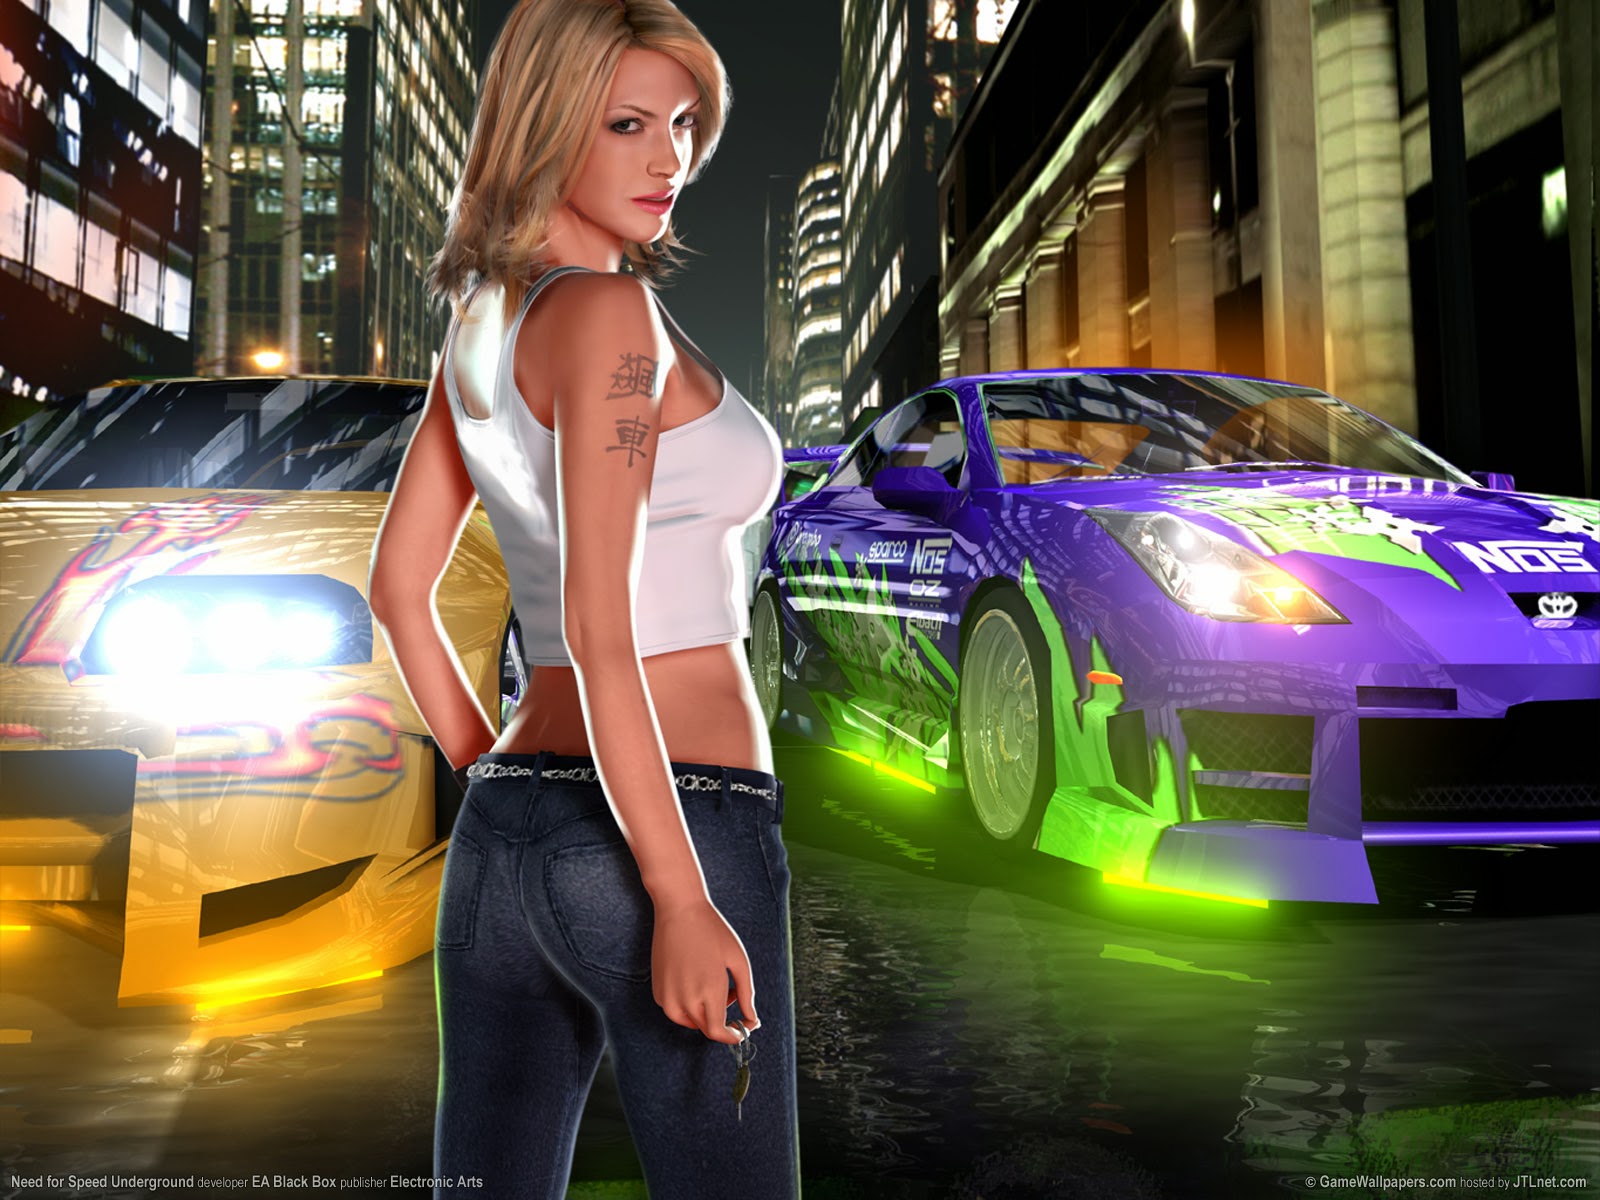 need for speed underground 2 wallpaper,vehicle,automotive design,car,sports car,drifting